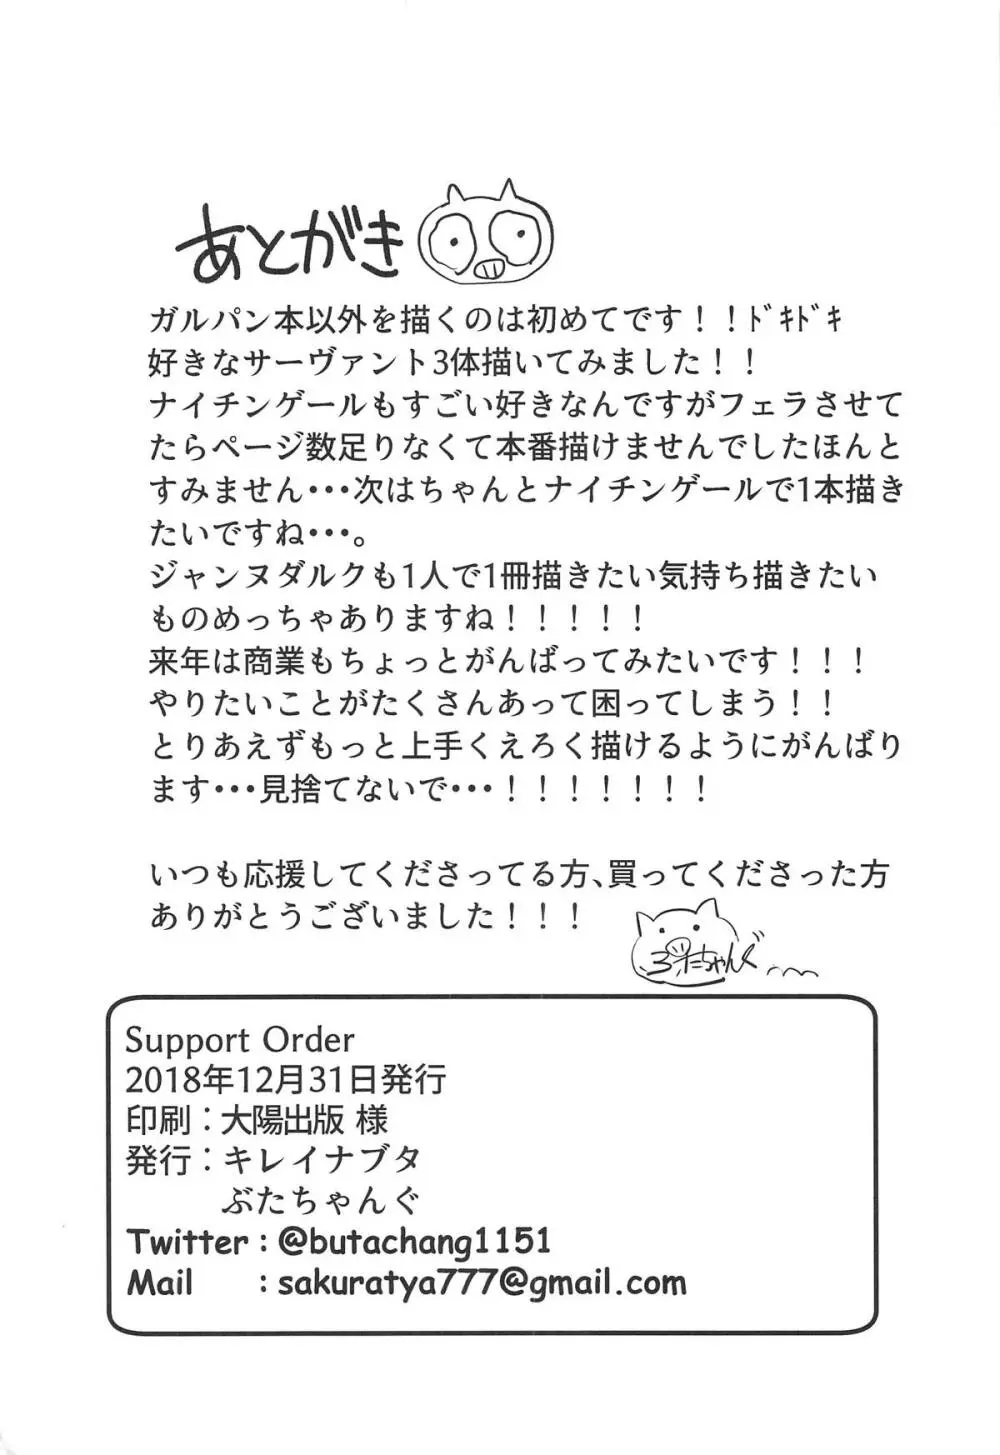 Support Order 24ページ